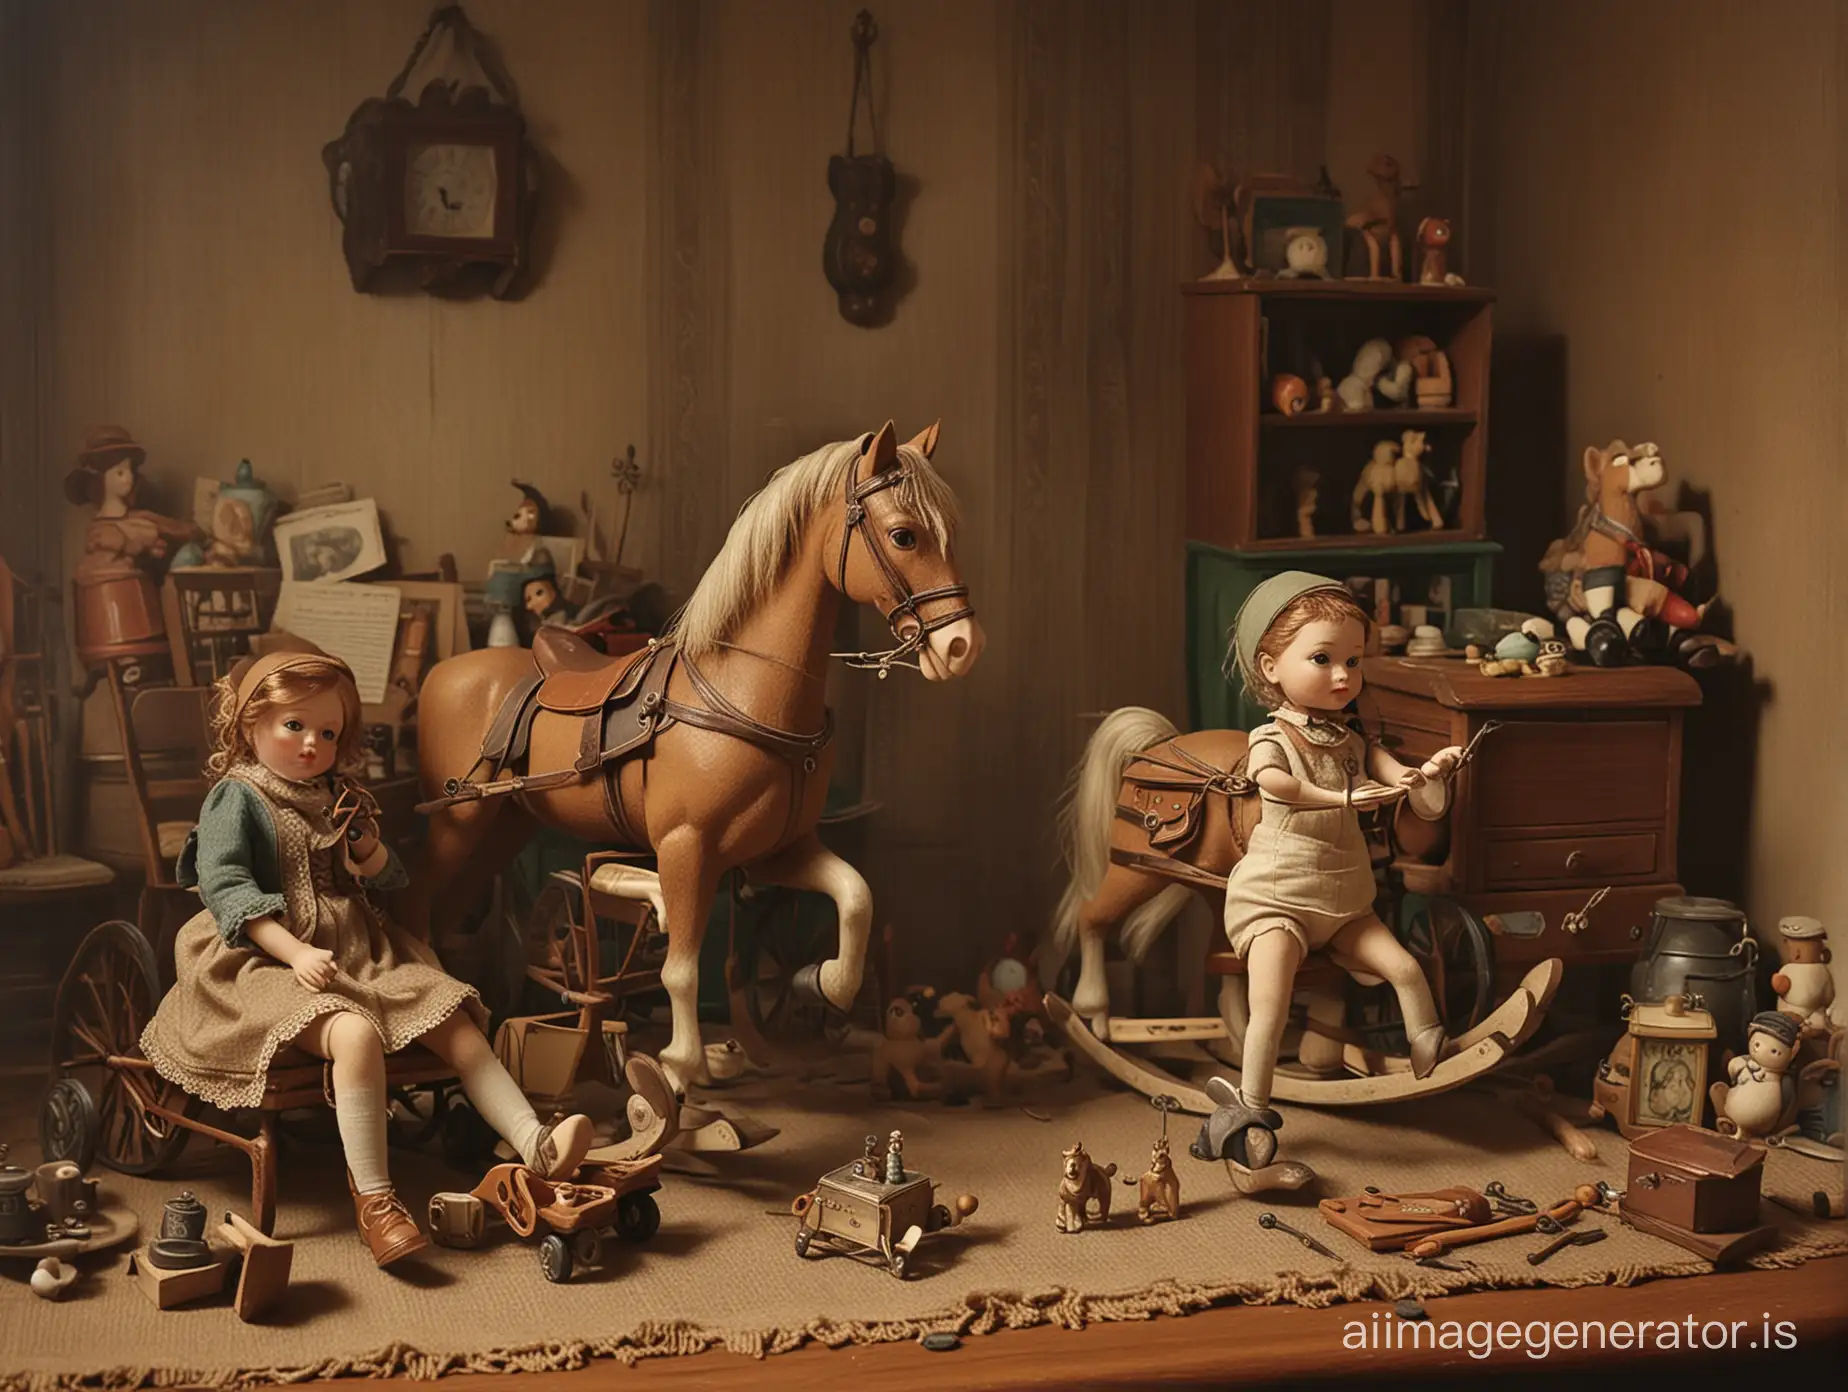 Old dusty toys, including dolls, music boxes, marionettes, and rocking horses. Style: Detailed Photorealistic, Nostalgic and melancholic atmosphere, Warm and subdued, dim light. Predominant colors are soft and dusty, such as brown, beige, and sage green. Warm and cozy atmosphere. Shadows are soft and diffuse.